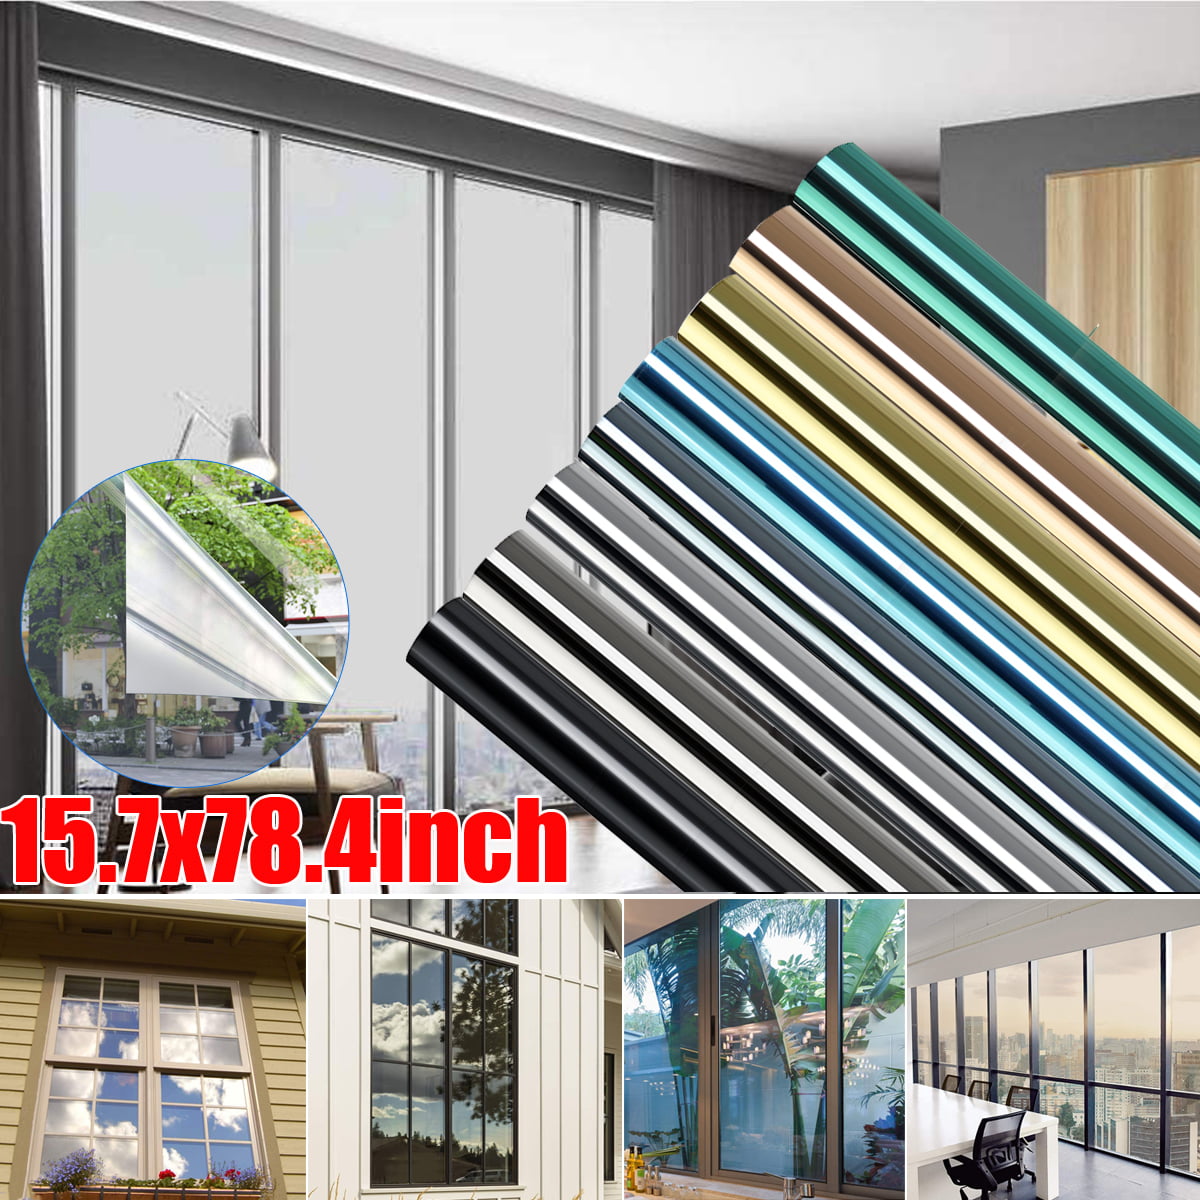 Static Cling Window Film36" Wide x 10 Ft. Modern Privacy Lines 